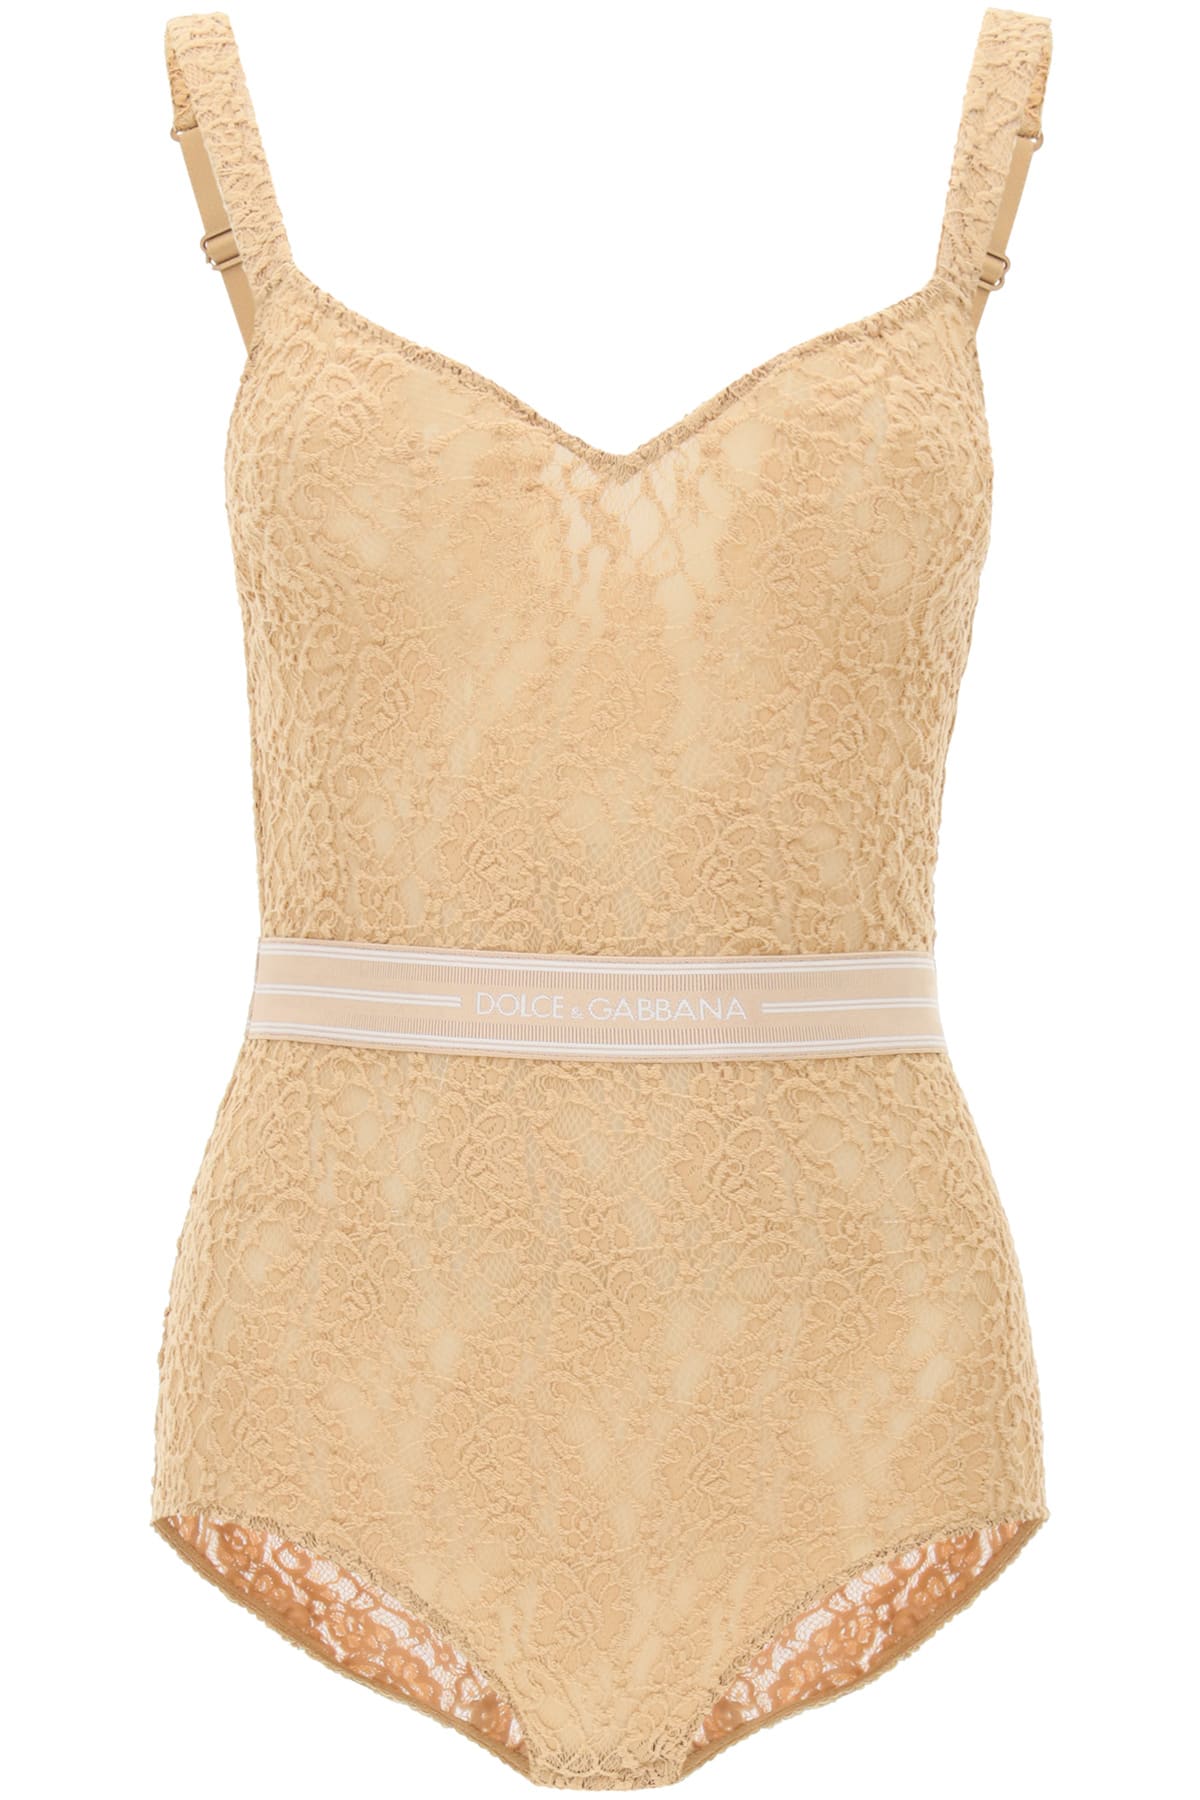 DOLCE & GABBANA LACE BODYSUIT WITH LOGO BAND,O9A14T FLMPS F0600